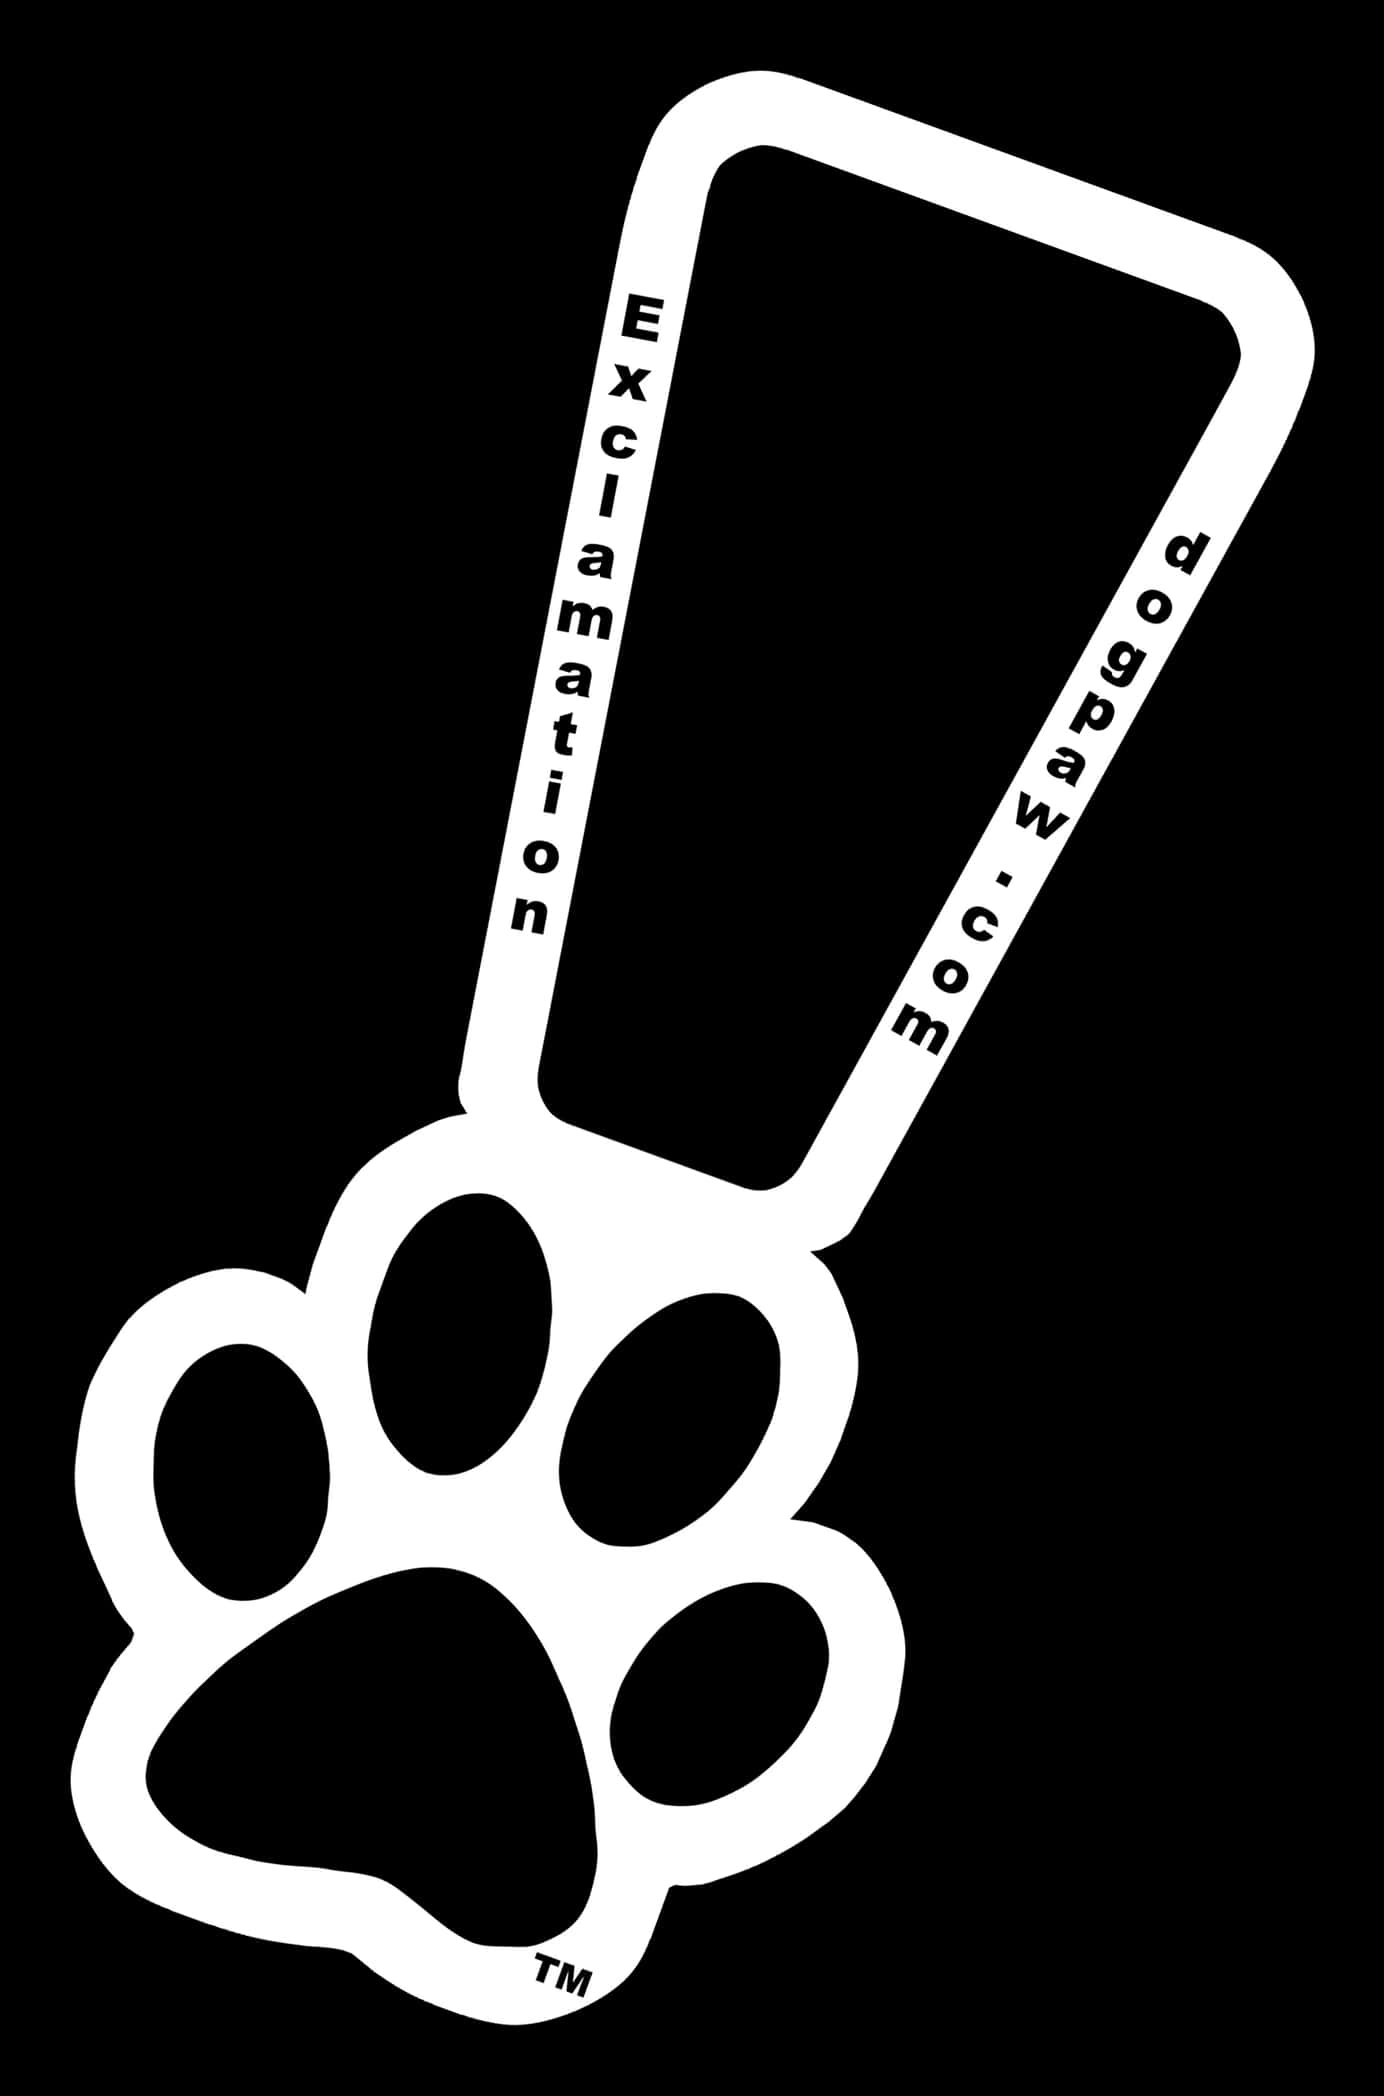 Exclamation Paw Graphic Blackand White